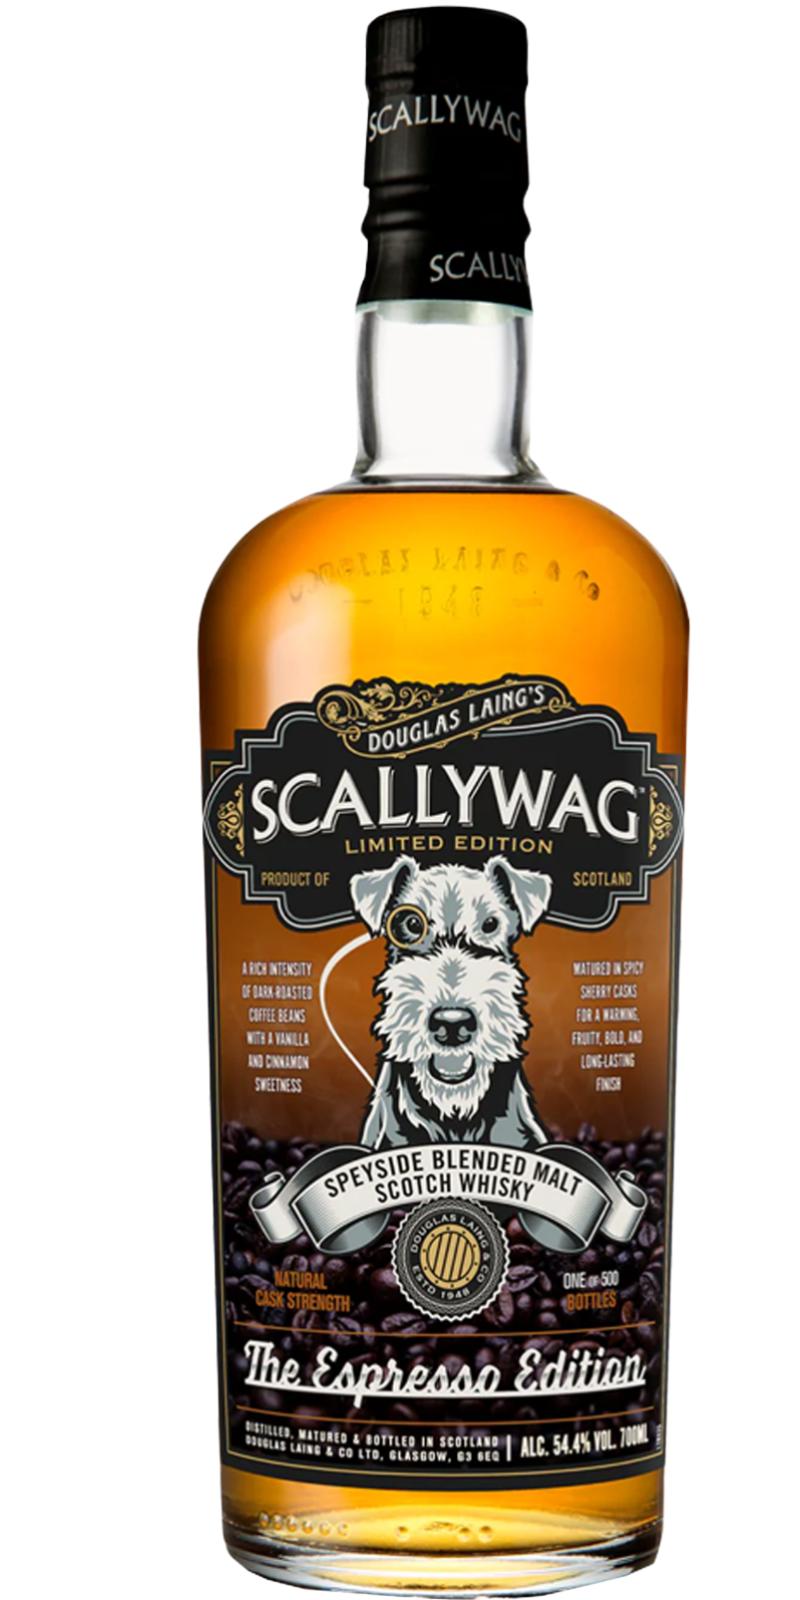 Scallywag The Espresso Edition DL Spanish sherry casks UK Exclusive 54.4% 700ml